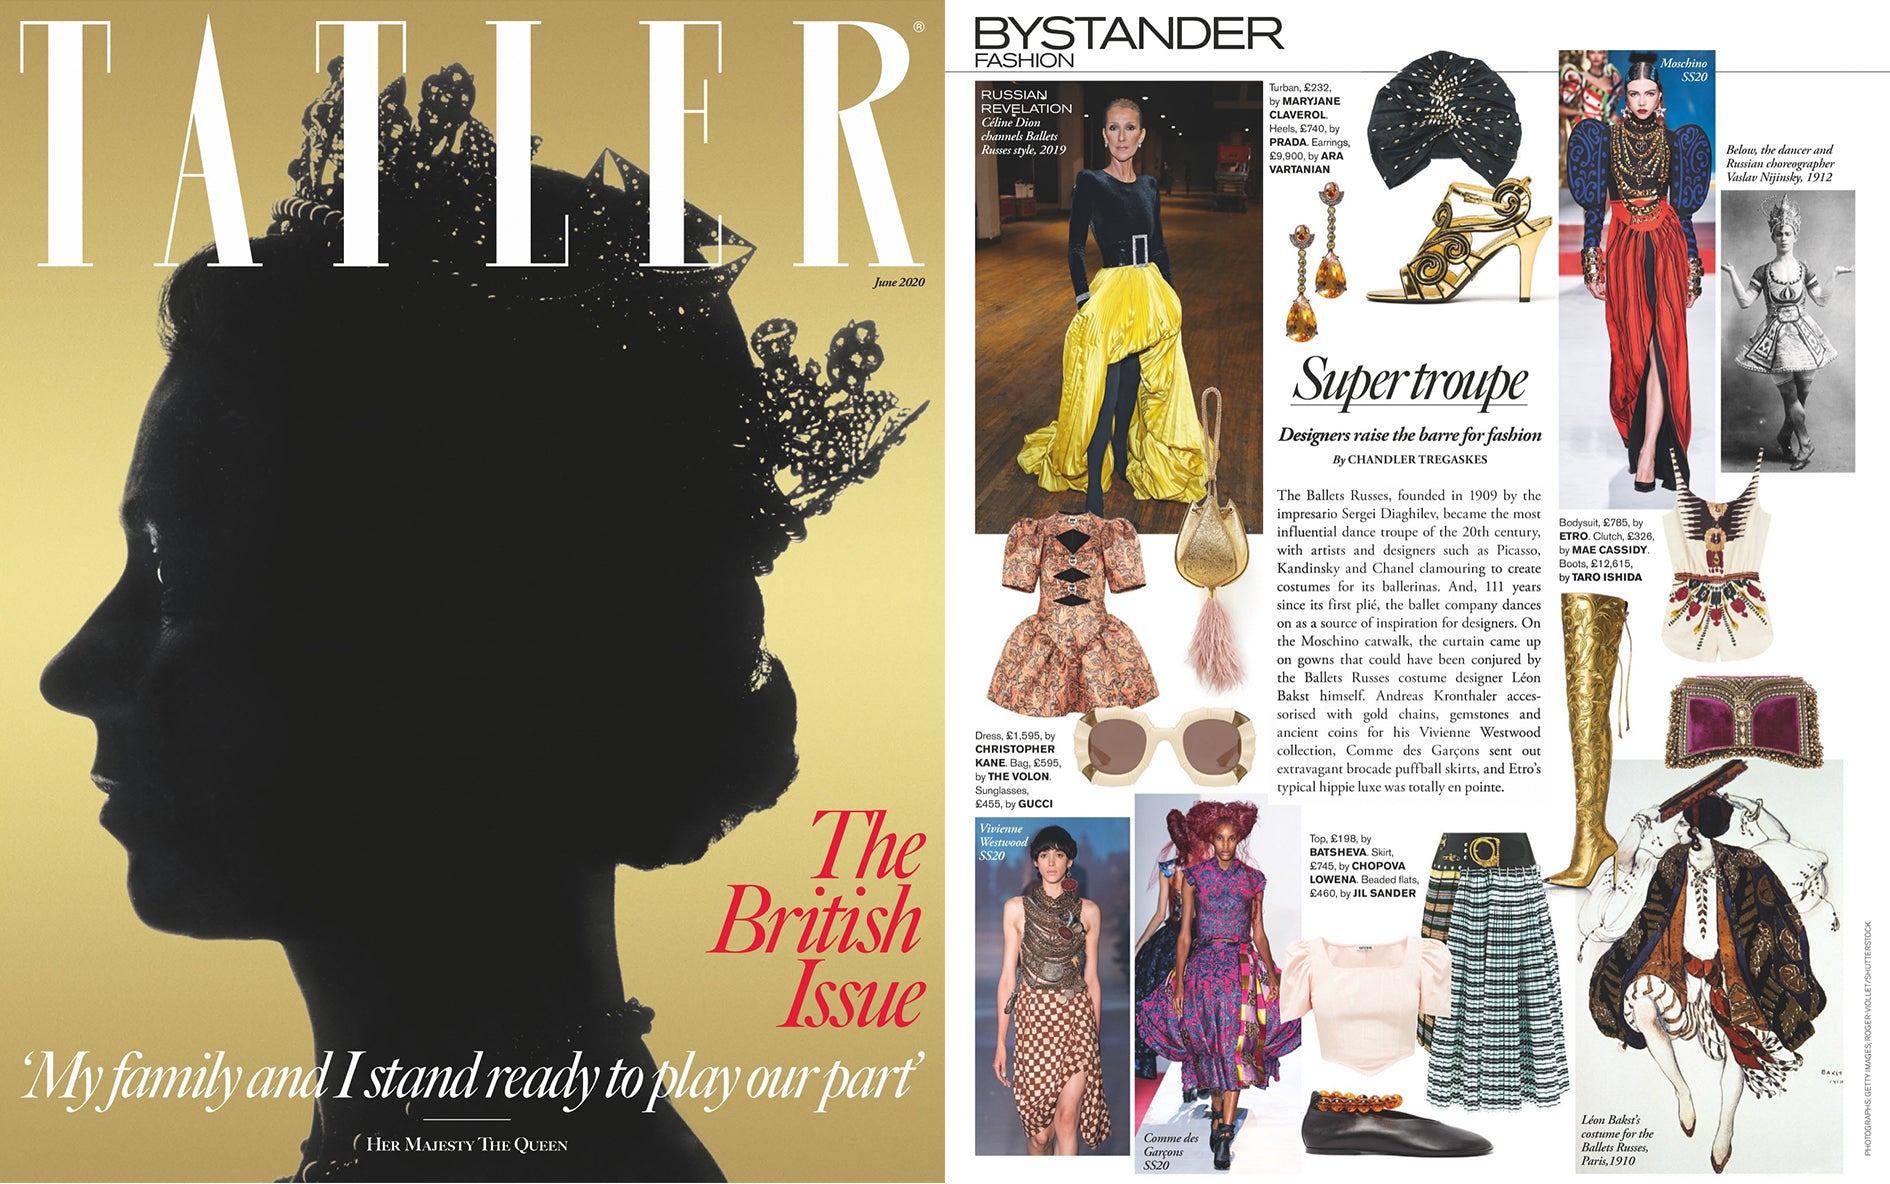 TATLER MAGAZINE features Mae Cassidy in Her Majesty The Queen's Cover,